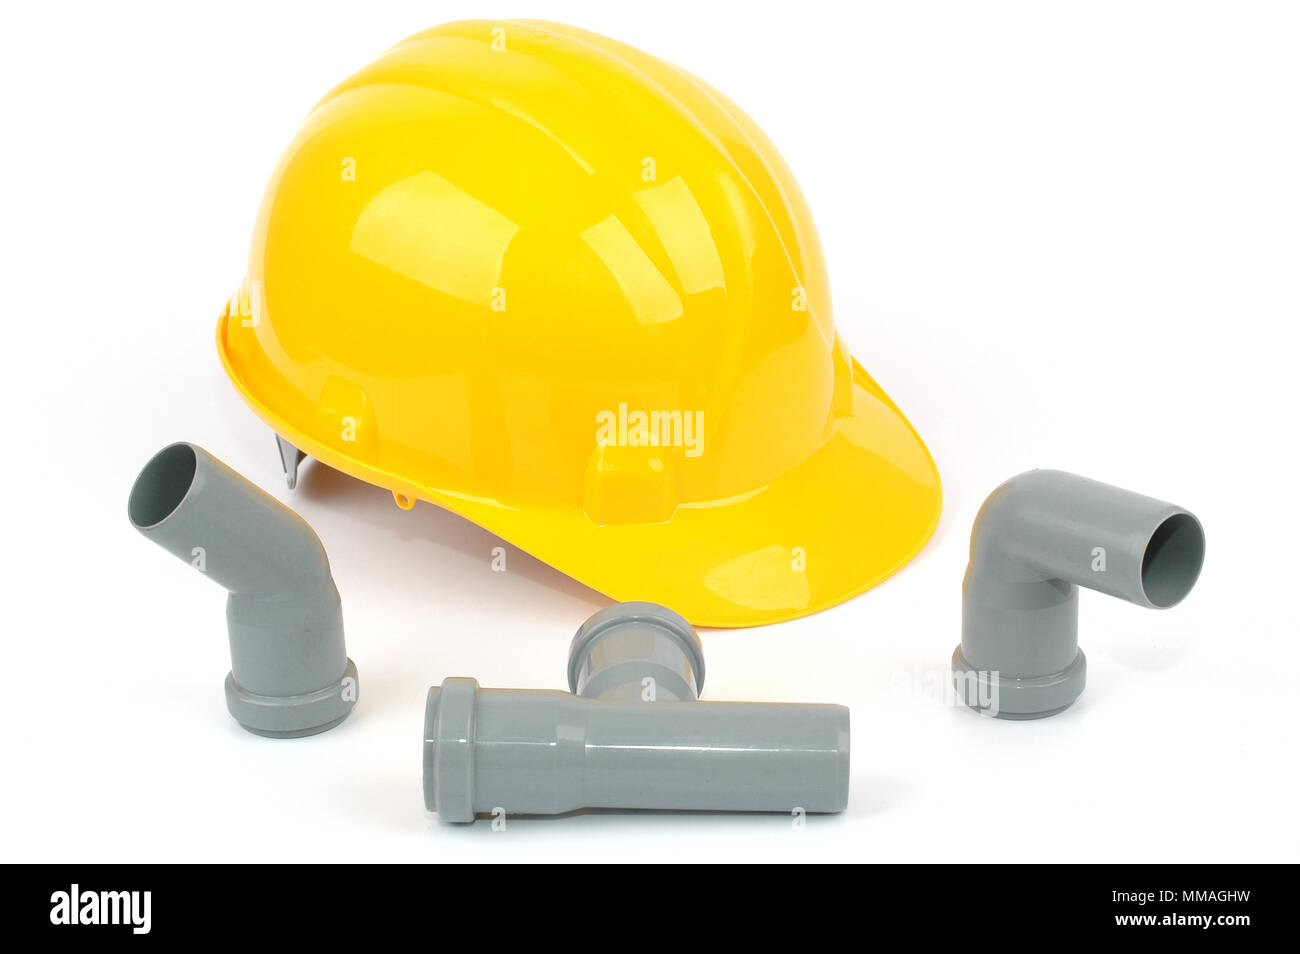 https://c8.alamy.com/comp/MMAGHW/photo-of-various-pvc-fittings-for-drainage-used-in-water-distribution-systems-and-yellow-safety-helmet-bathroom-renovation-concept-MMAGHW.jpg